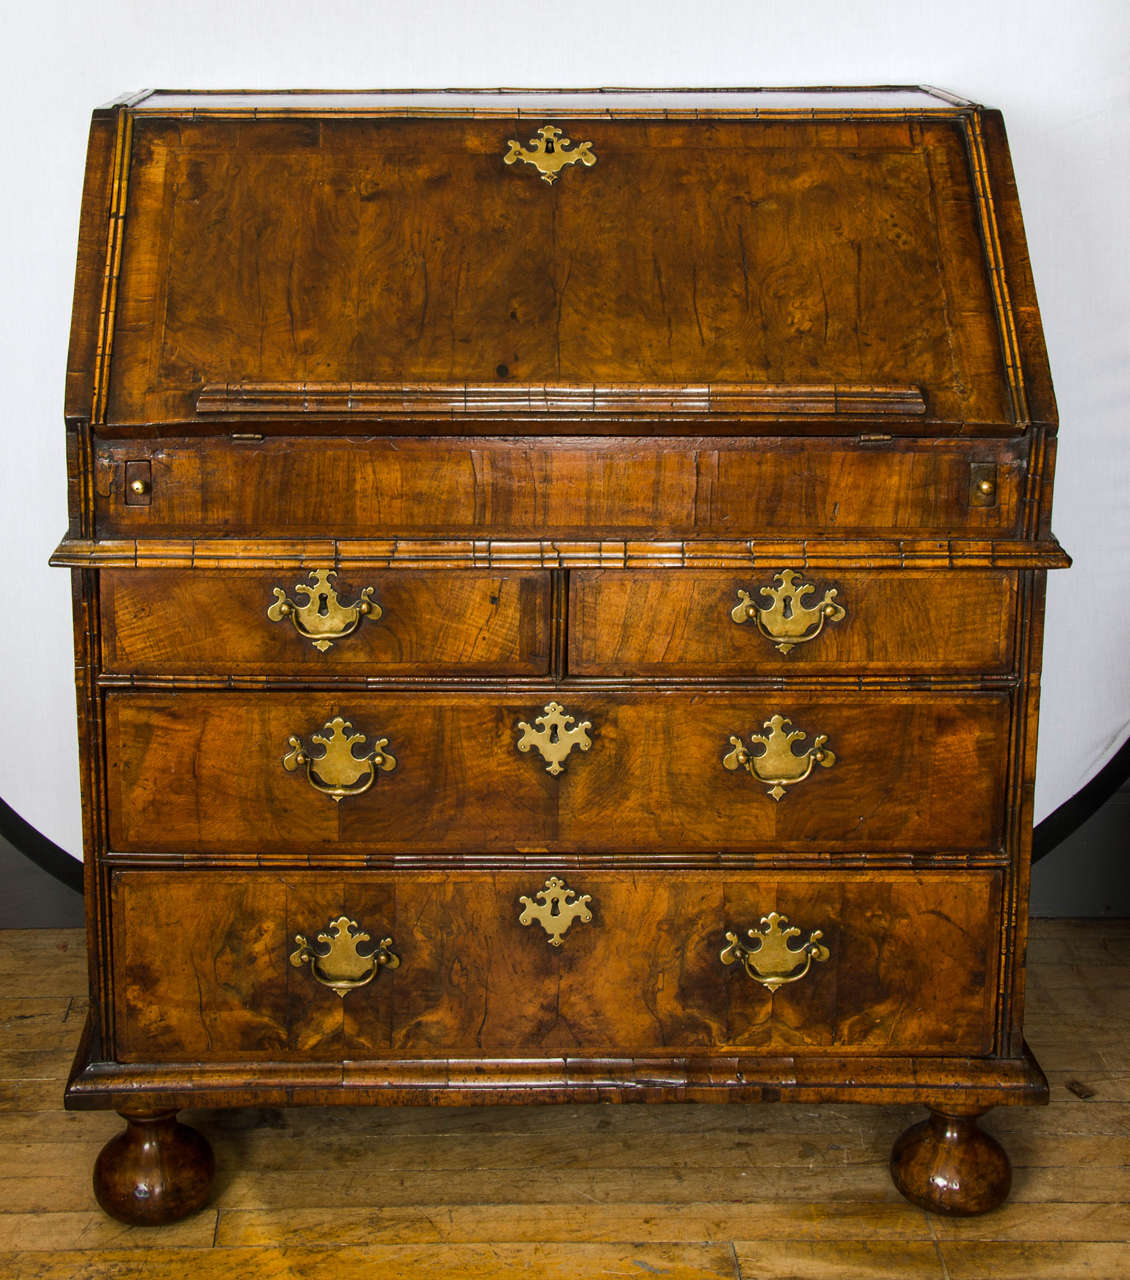 This superb and rare Queen Anne walnut fall front bureau, C. 1710 features the original handles and locks and has the original wax finish. The interior of this beautifully patinaed bureau has two drawers on two levels with pigeon holes above them.